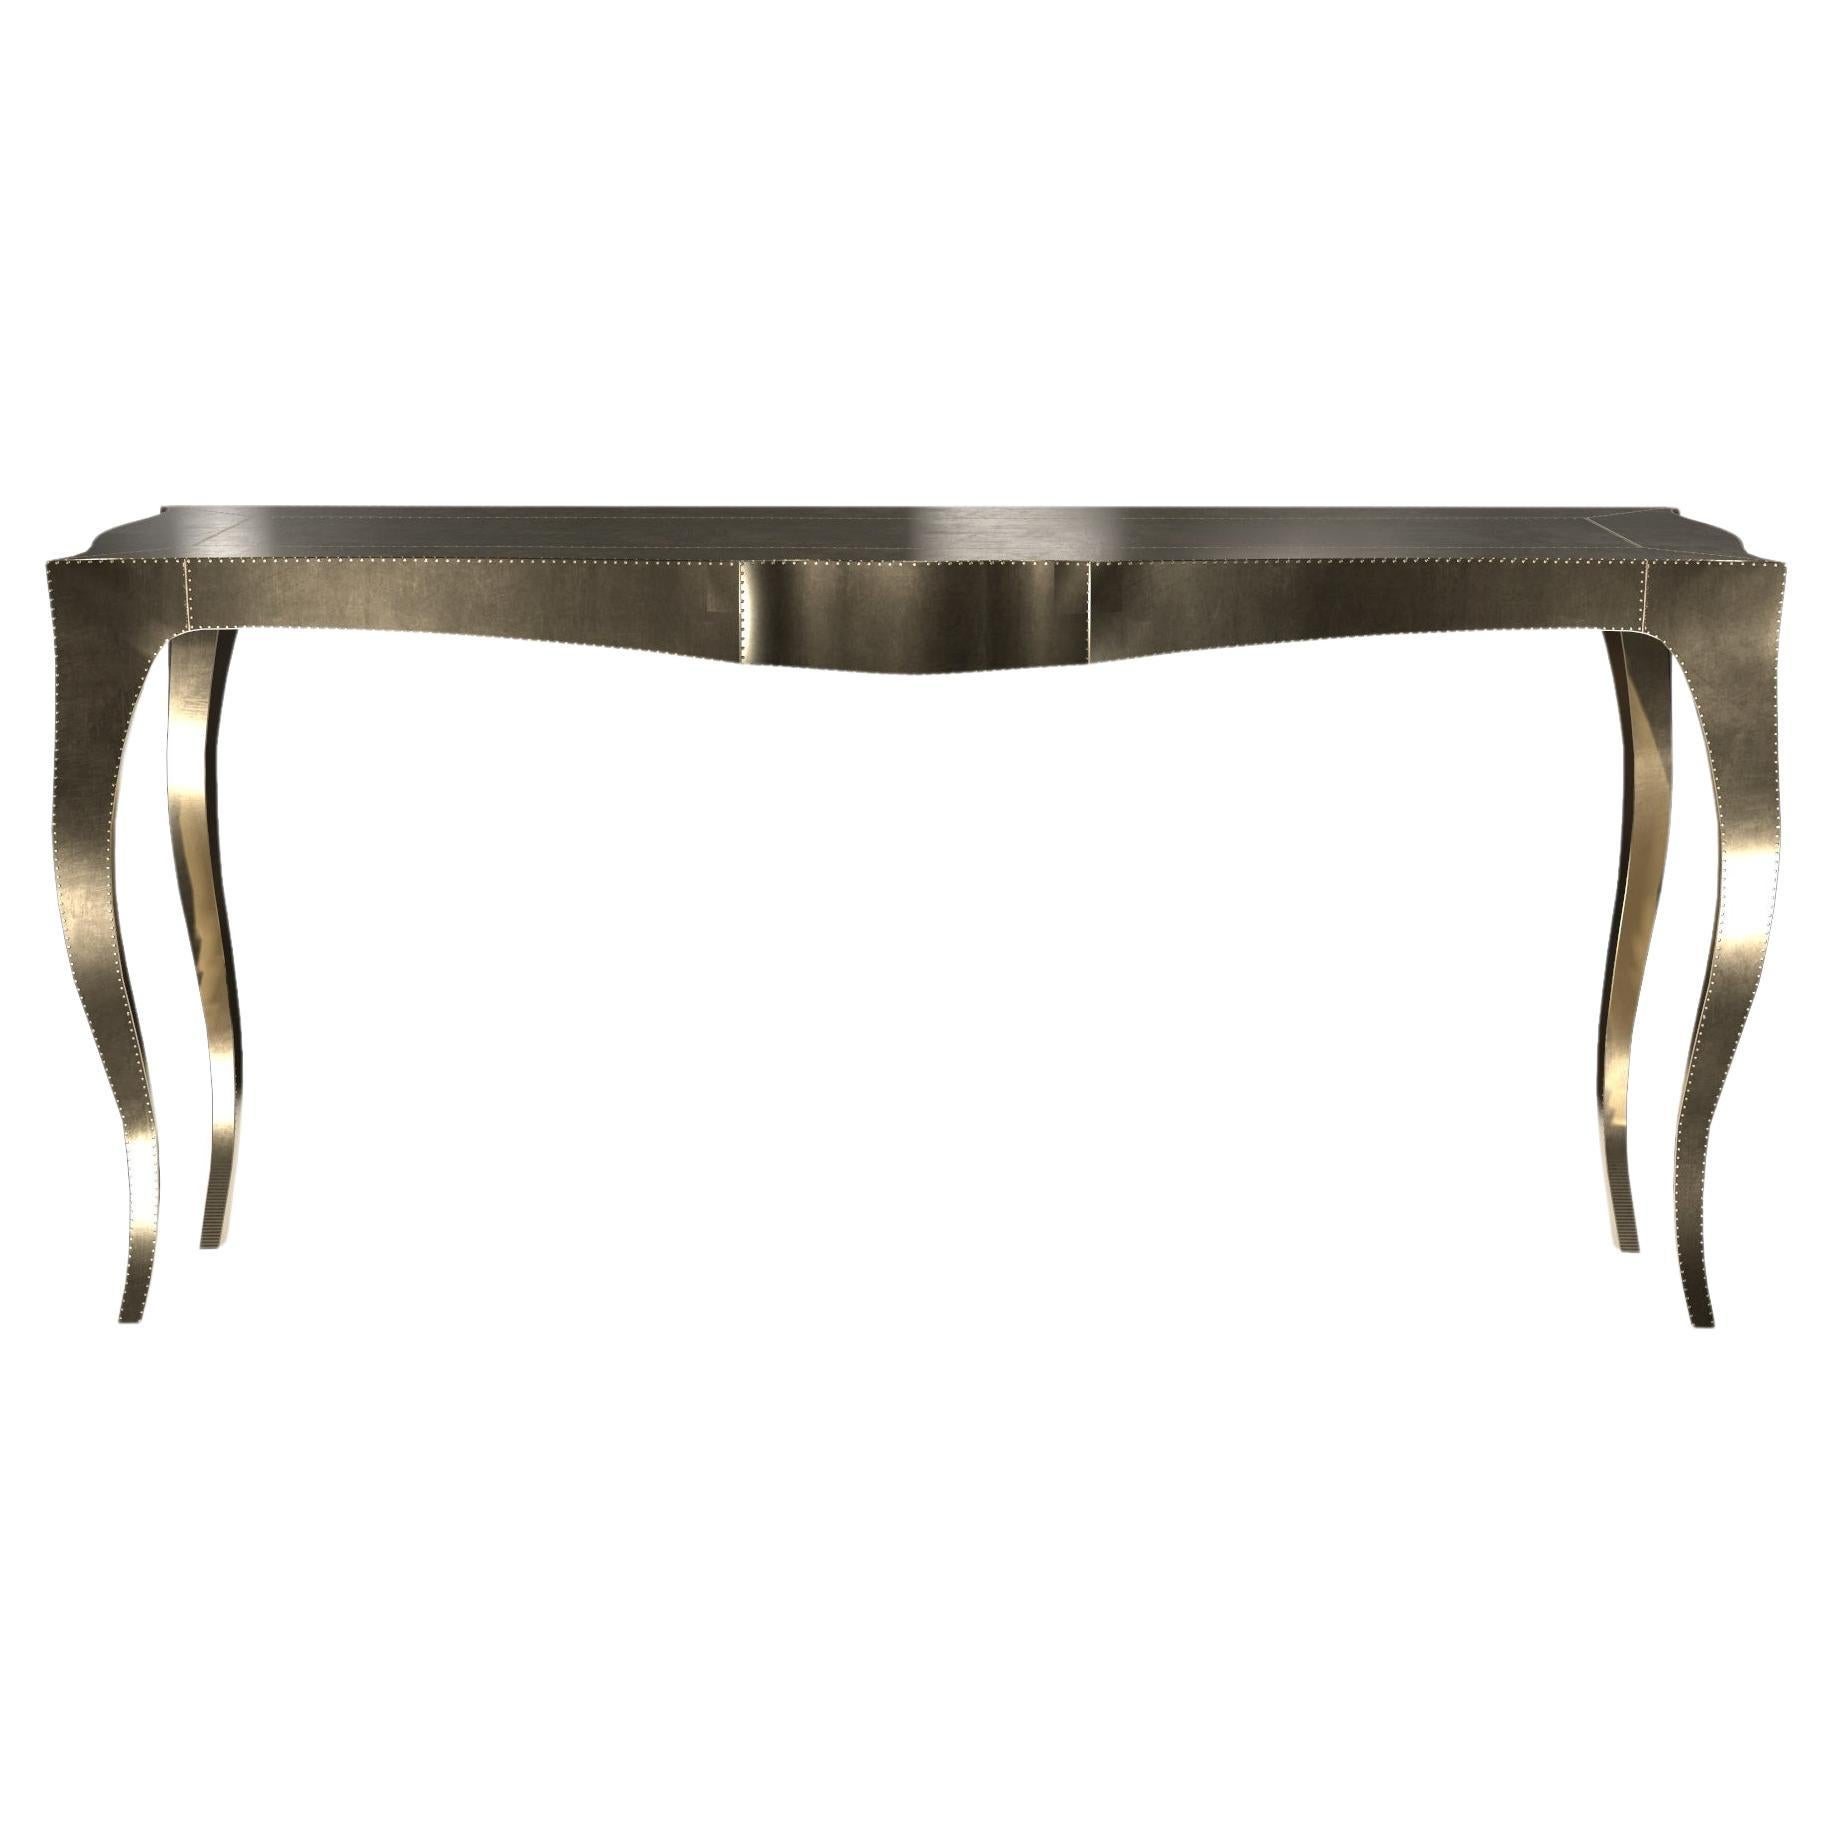 Louise Console Art Deco Side Tables Smooth Brass by Paul Mathieu for S. Odegard